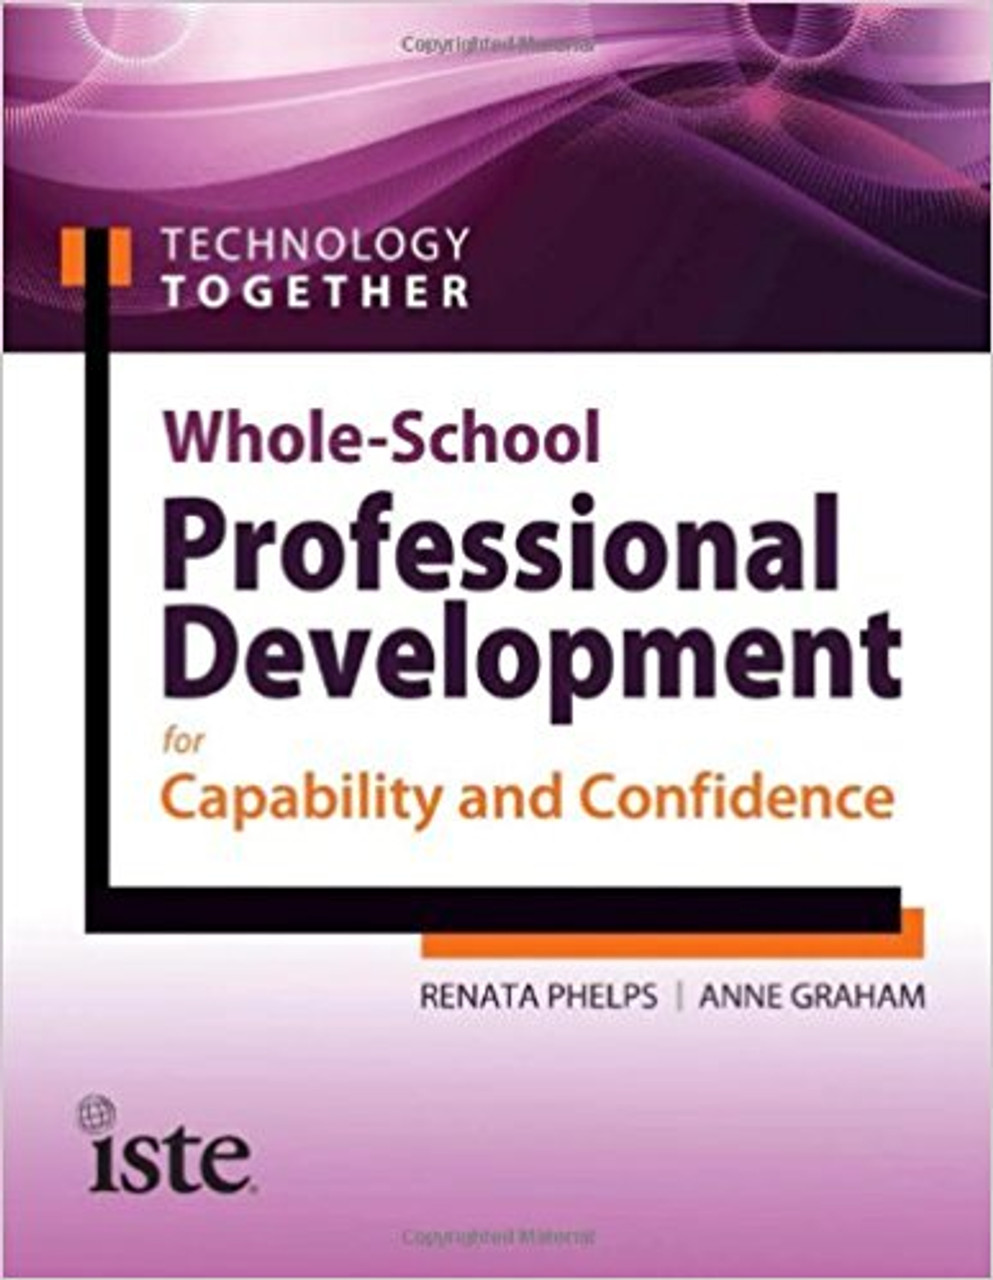 Technology Together: Whole-School Professional Development for Capability and Confidence by Renata Phelps